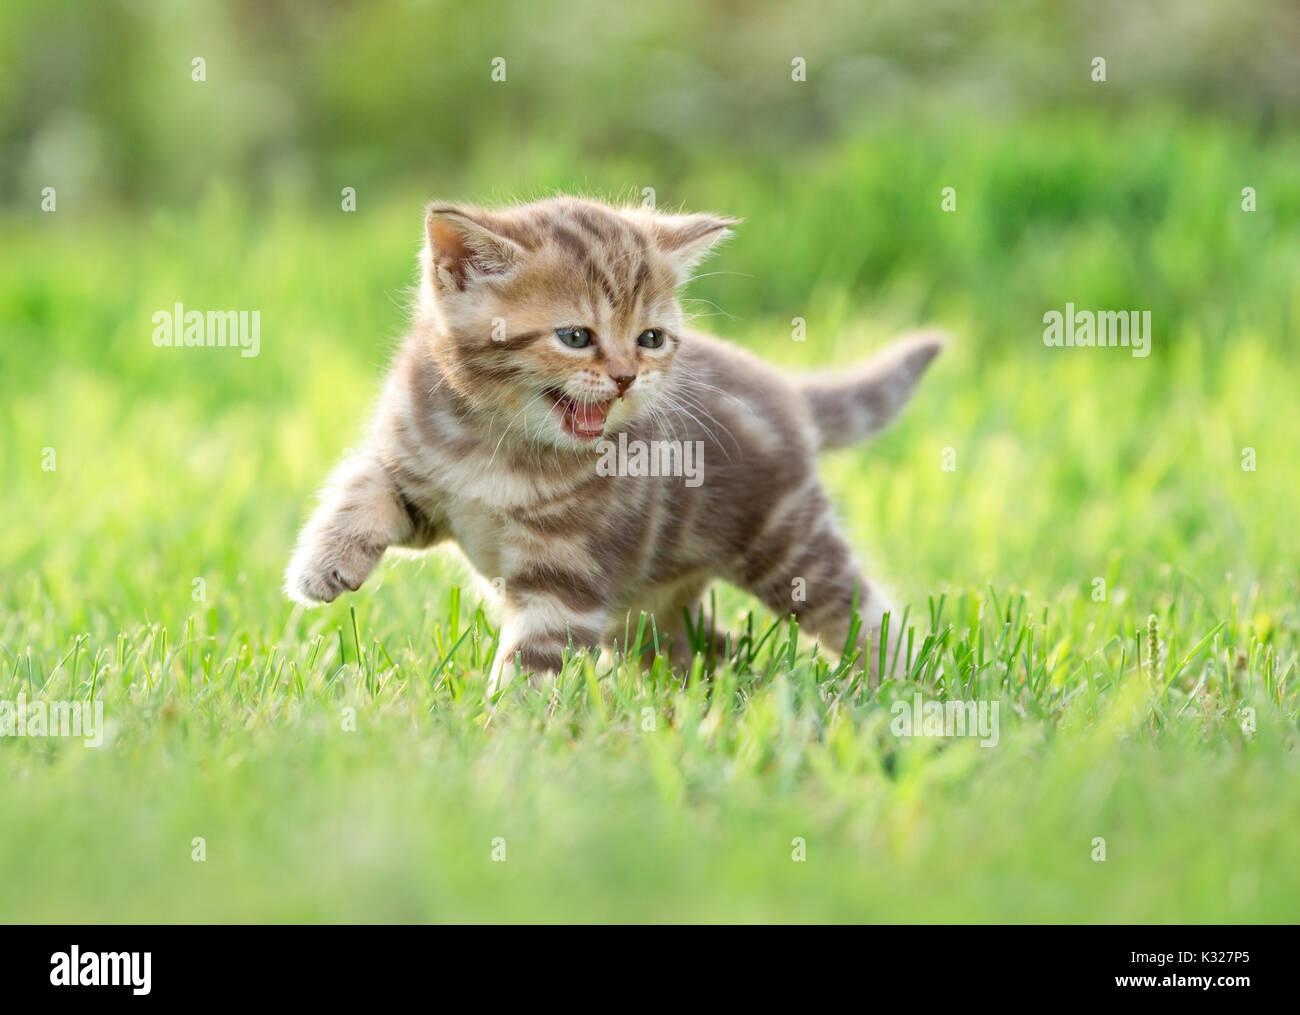 Young funny cat meowing in nature Stock Photo